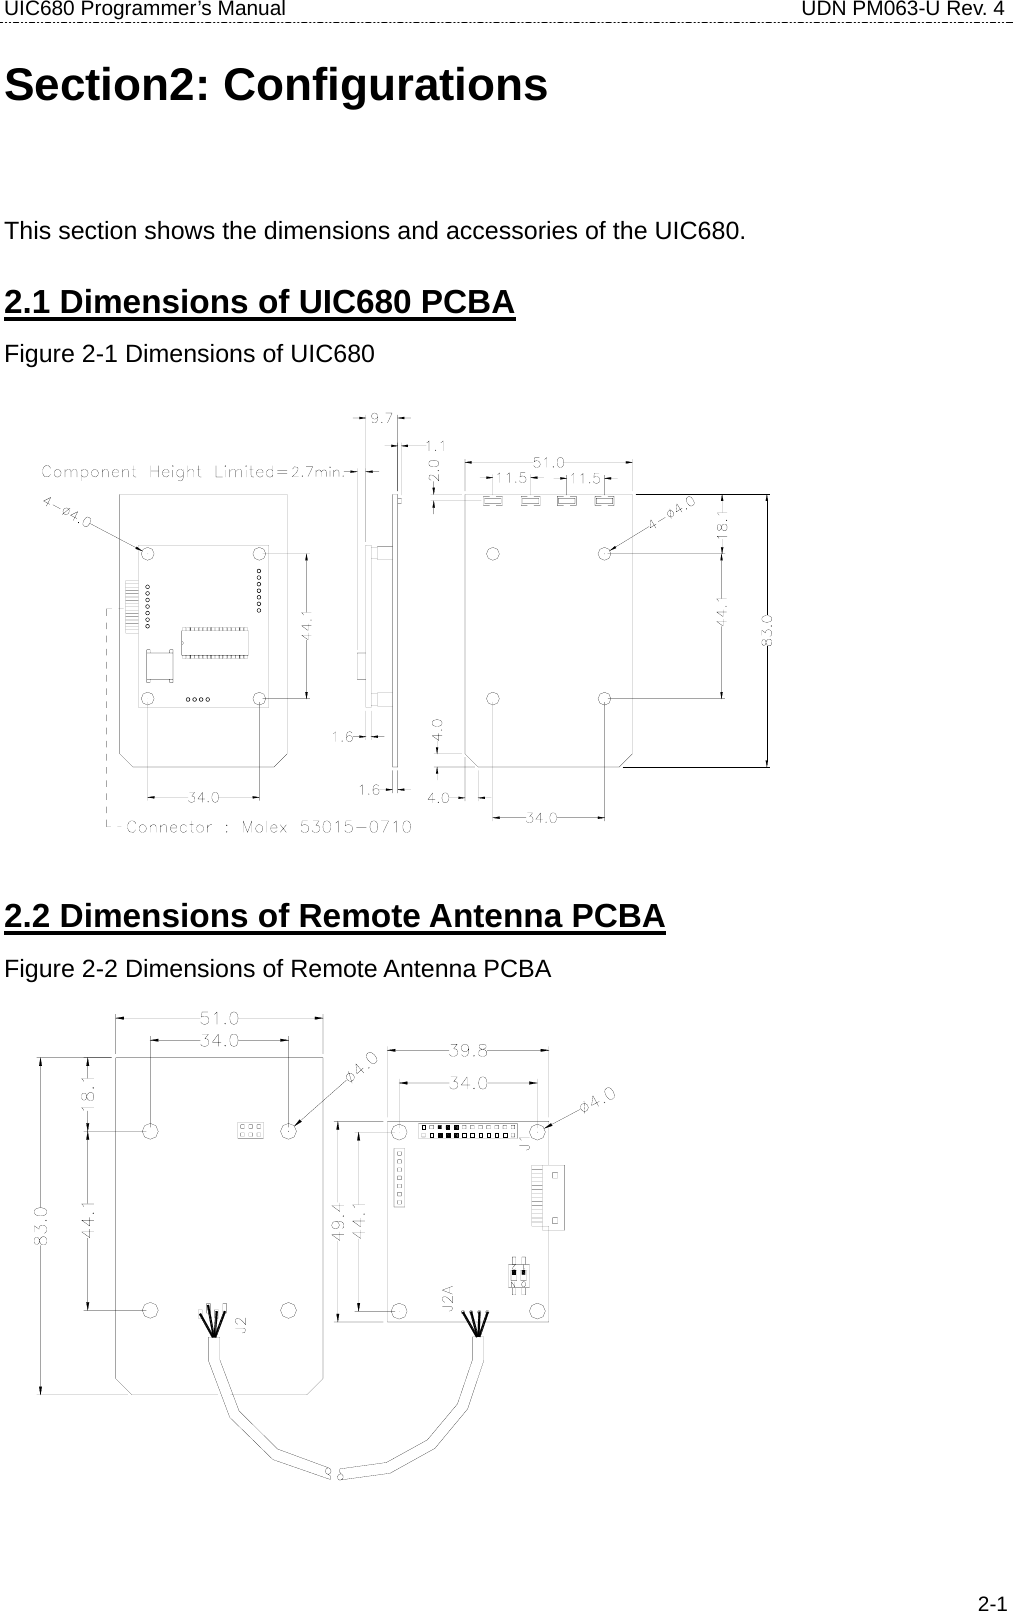 UIC680 Programmer’s Manual                                     UDN PM063-U Rev. 4  2-1Section2: Configurations This section shows the dimensions and accessories of the UIC680. 2.1 Dimensions of UIC680 PCBA Figure 2-1 Dimensions of UIC680  2.2 Dimensions of Remote Antenna PCBA Figure 2-2 Dimensions of Remote Antenna PCBA  